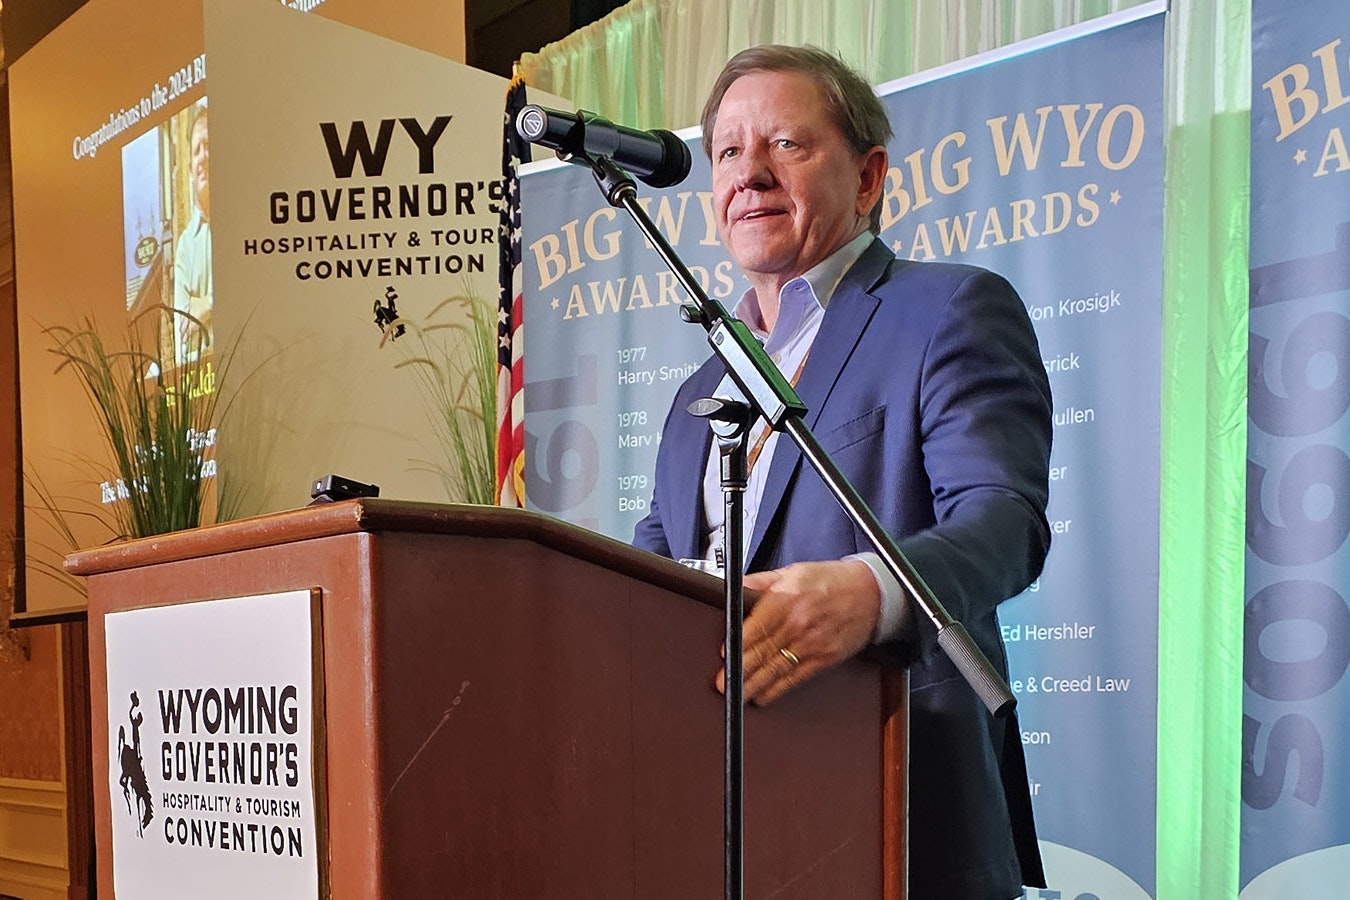 Jim Waldrop is almost speechless for a few moments at the podium after winning the 2024 BIG WYO Award.